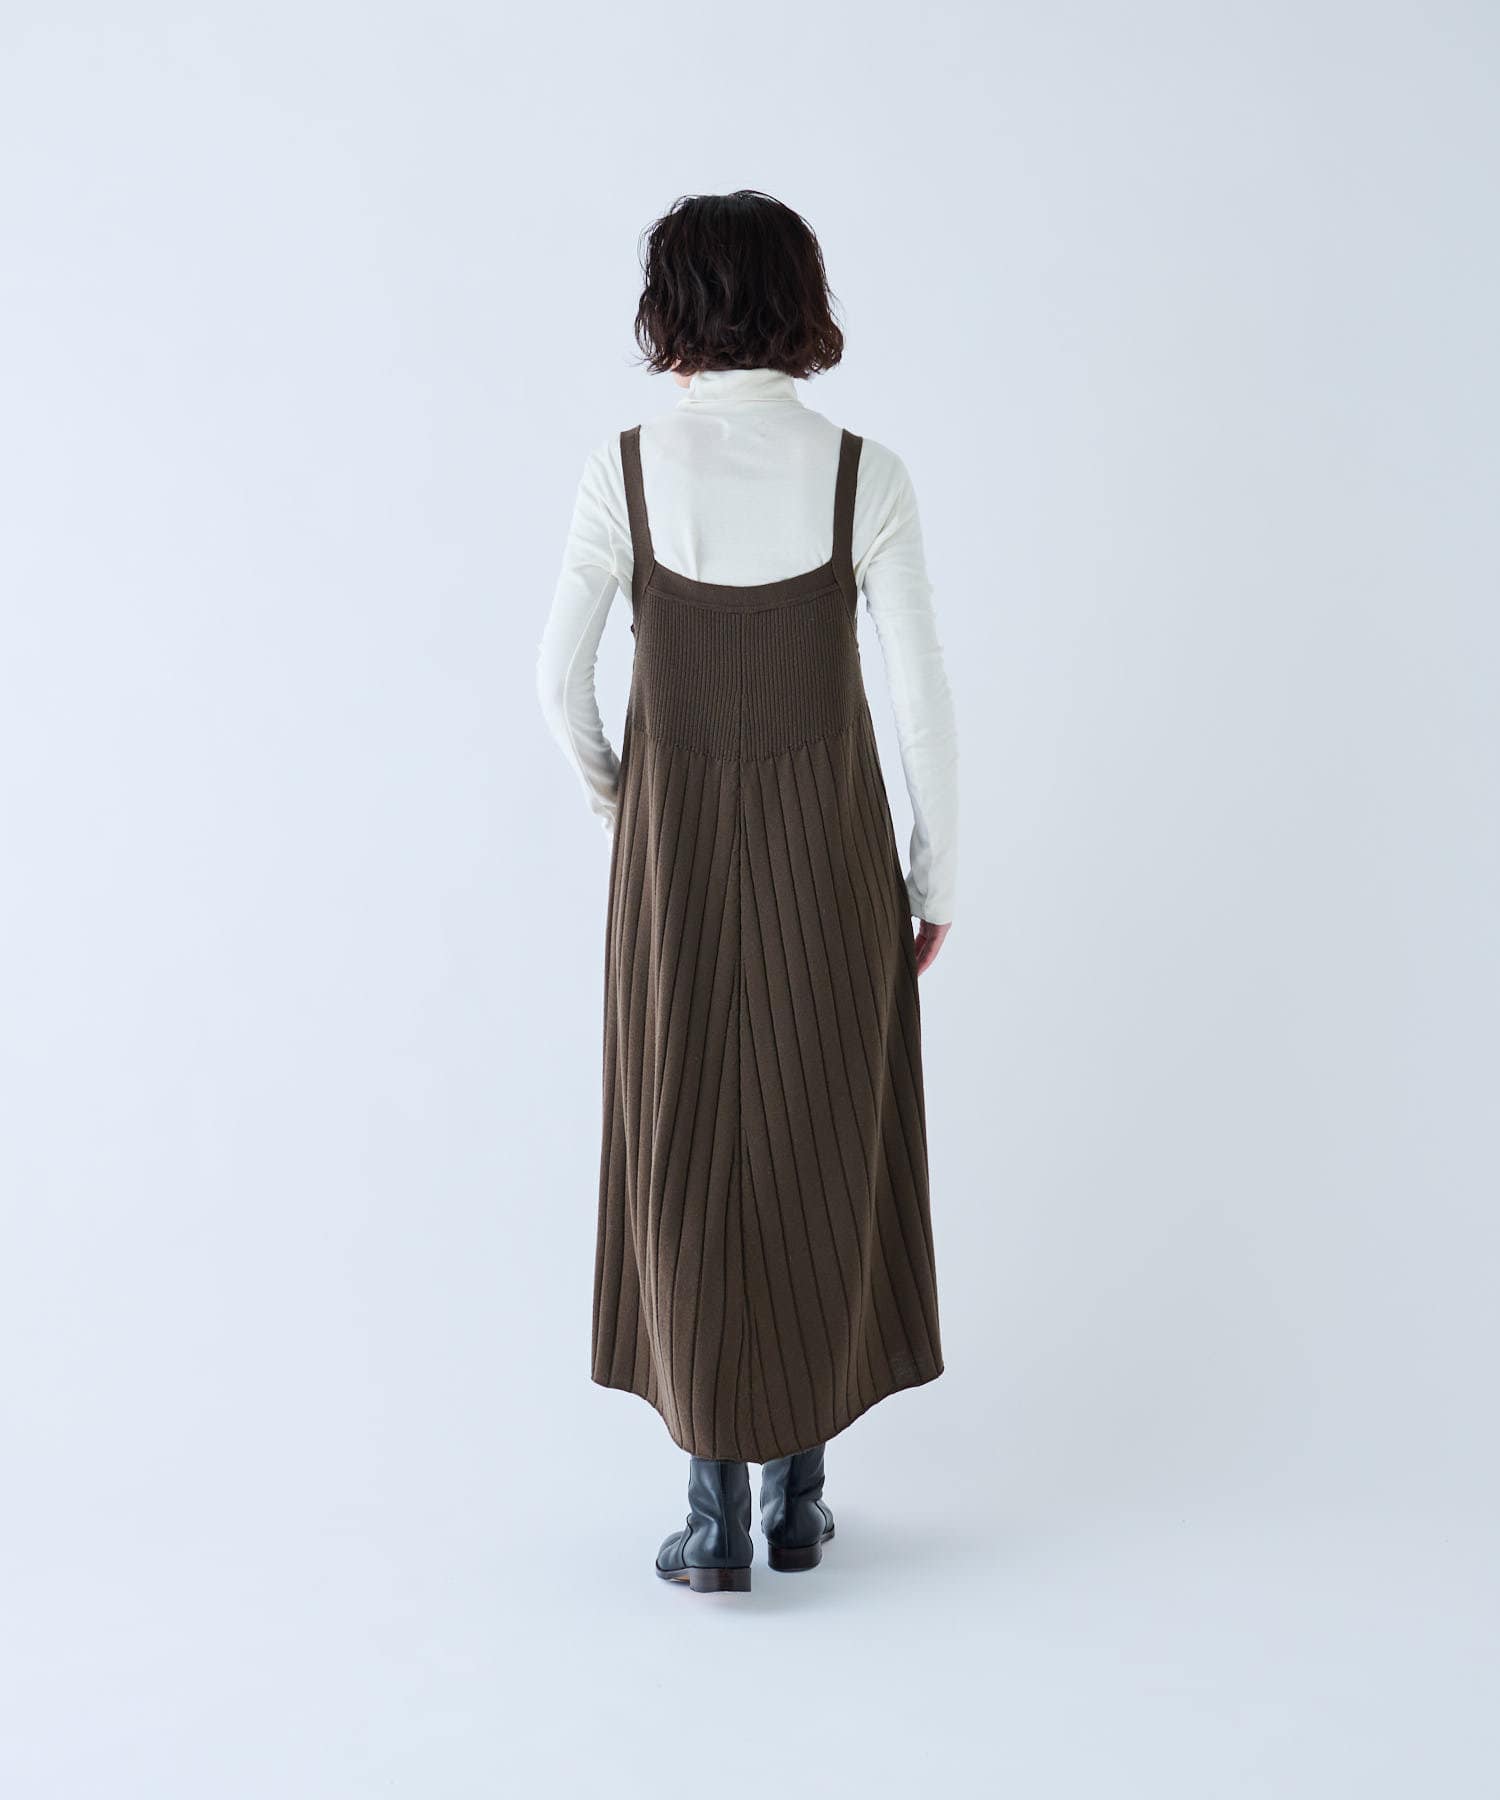 BLOOM&BRANCH(ブルームアンドブランチ) Phlannèl / Worsted Wool Camisole Dress